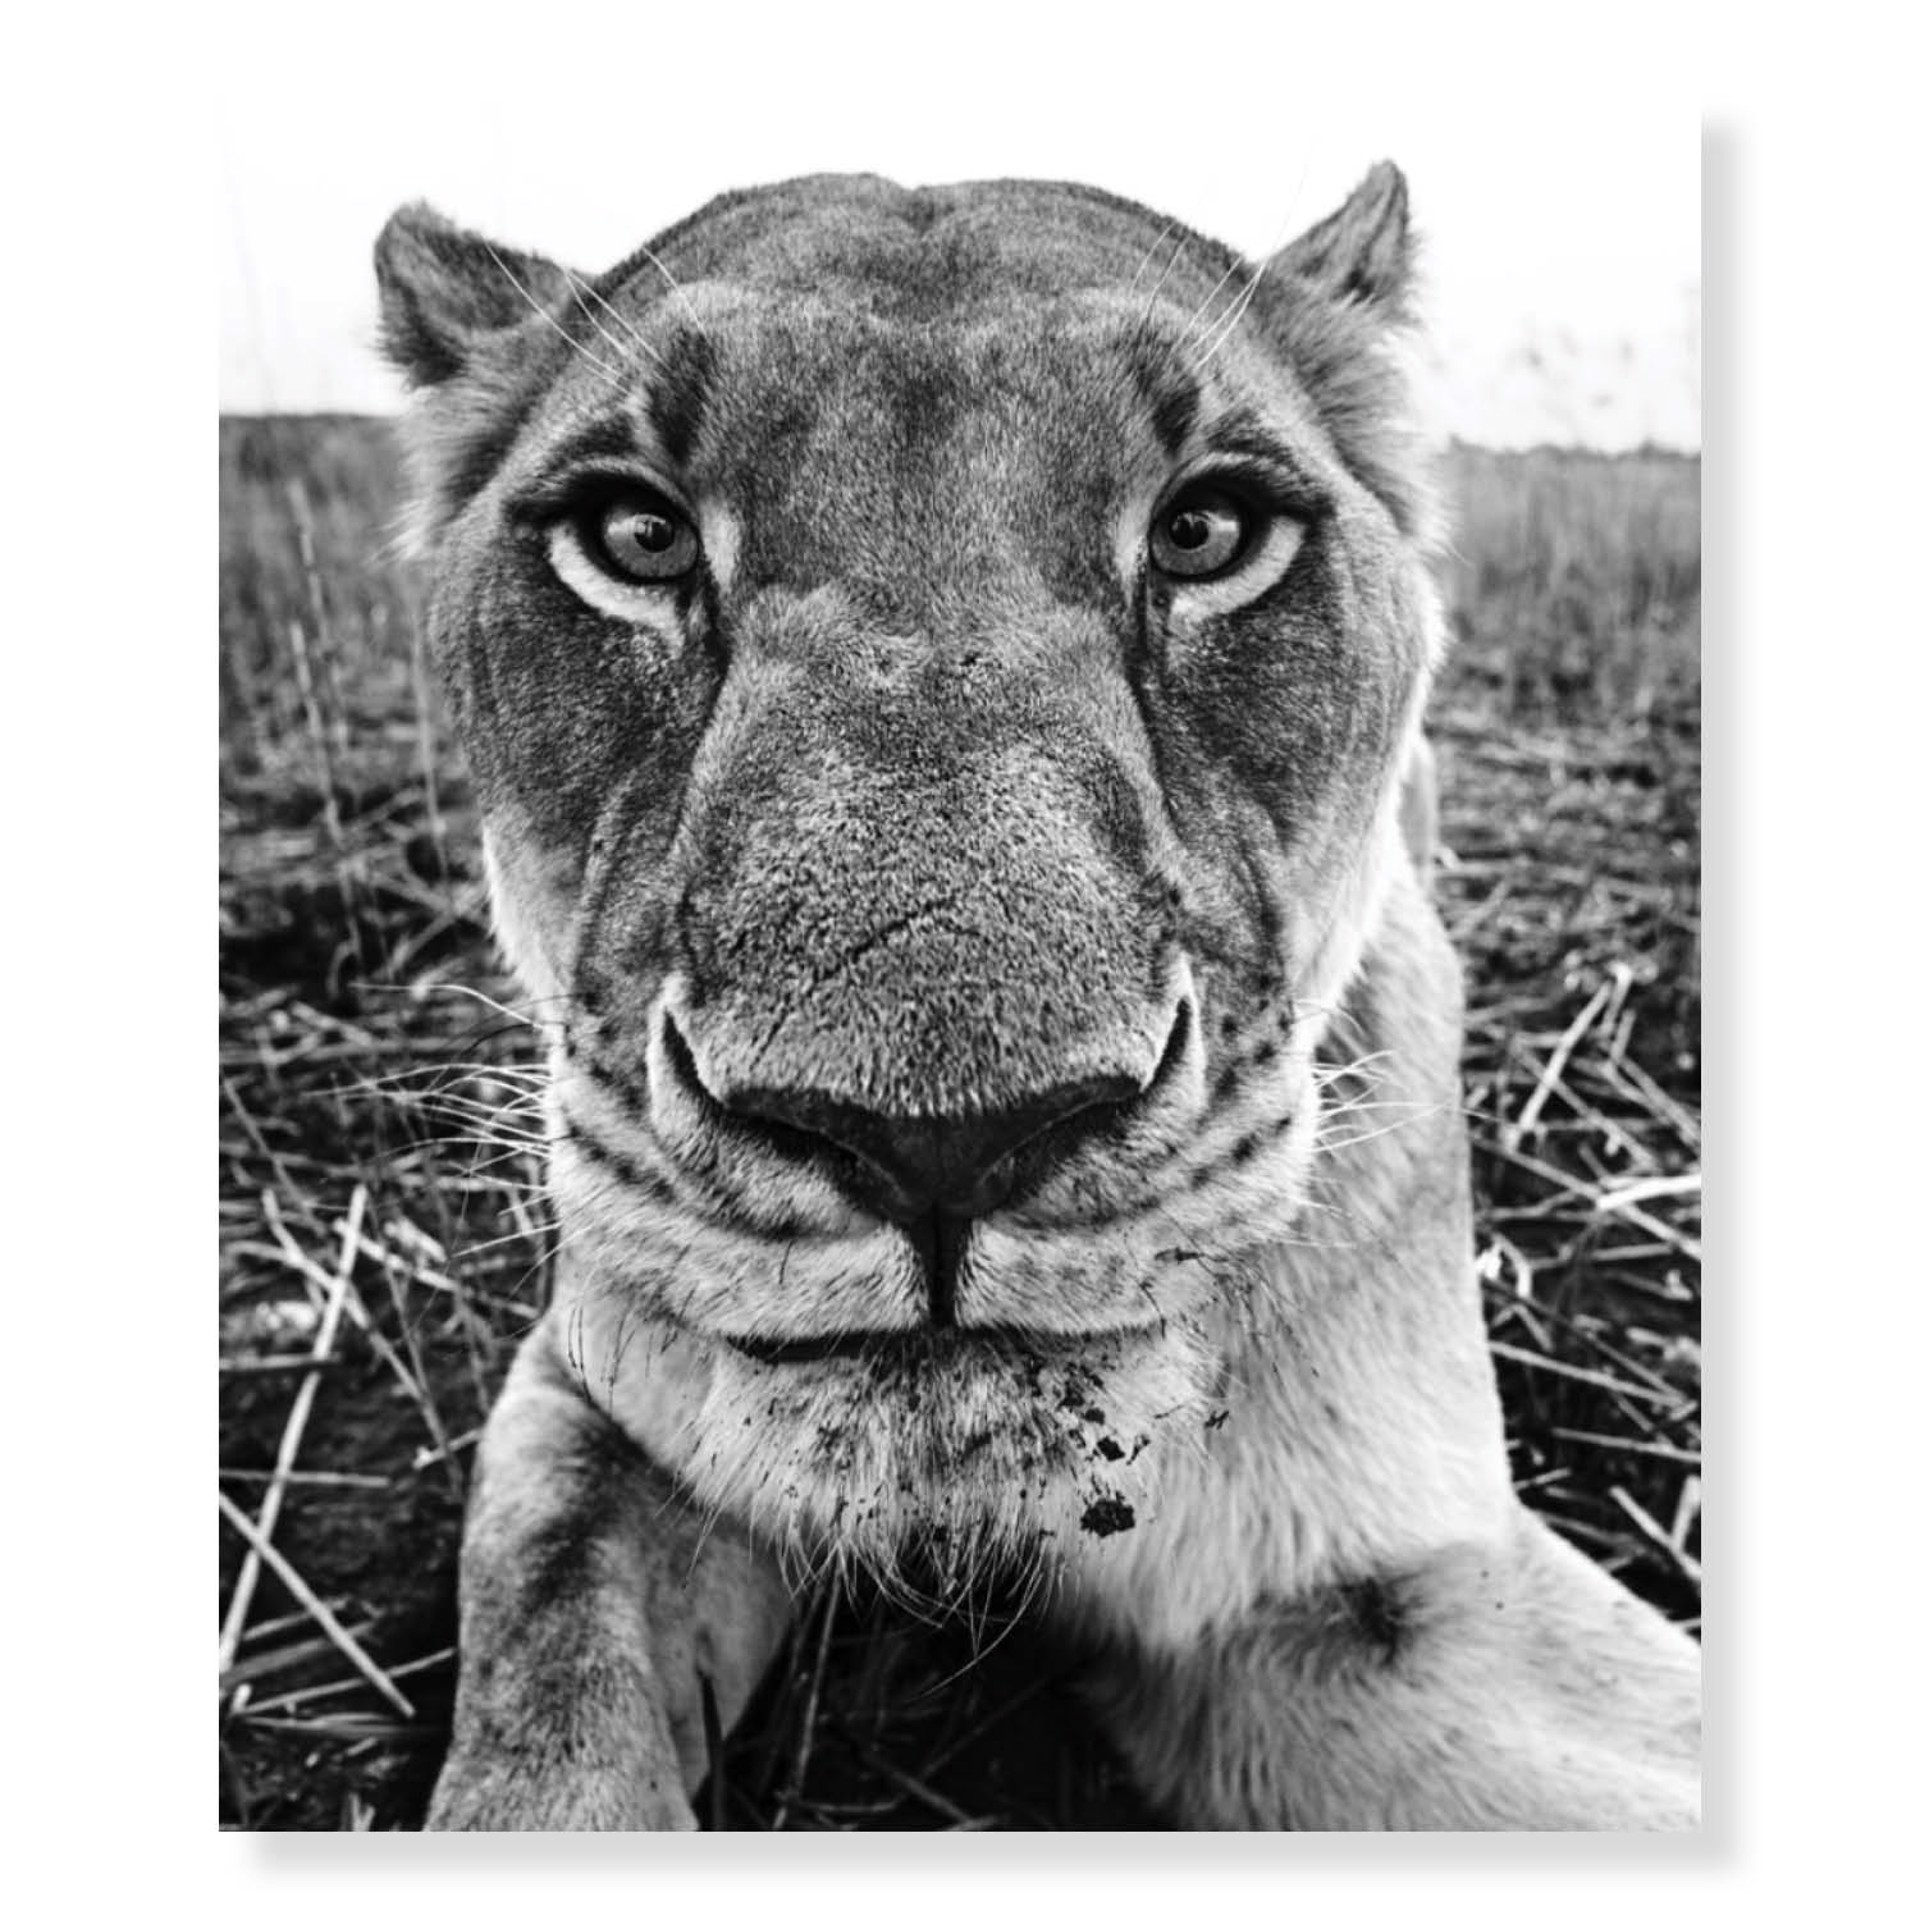 The Hunger Games by David Yarrow